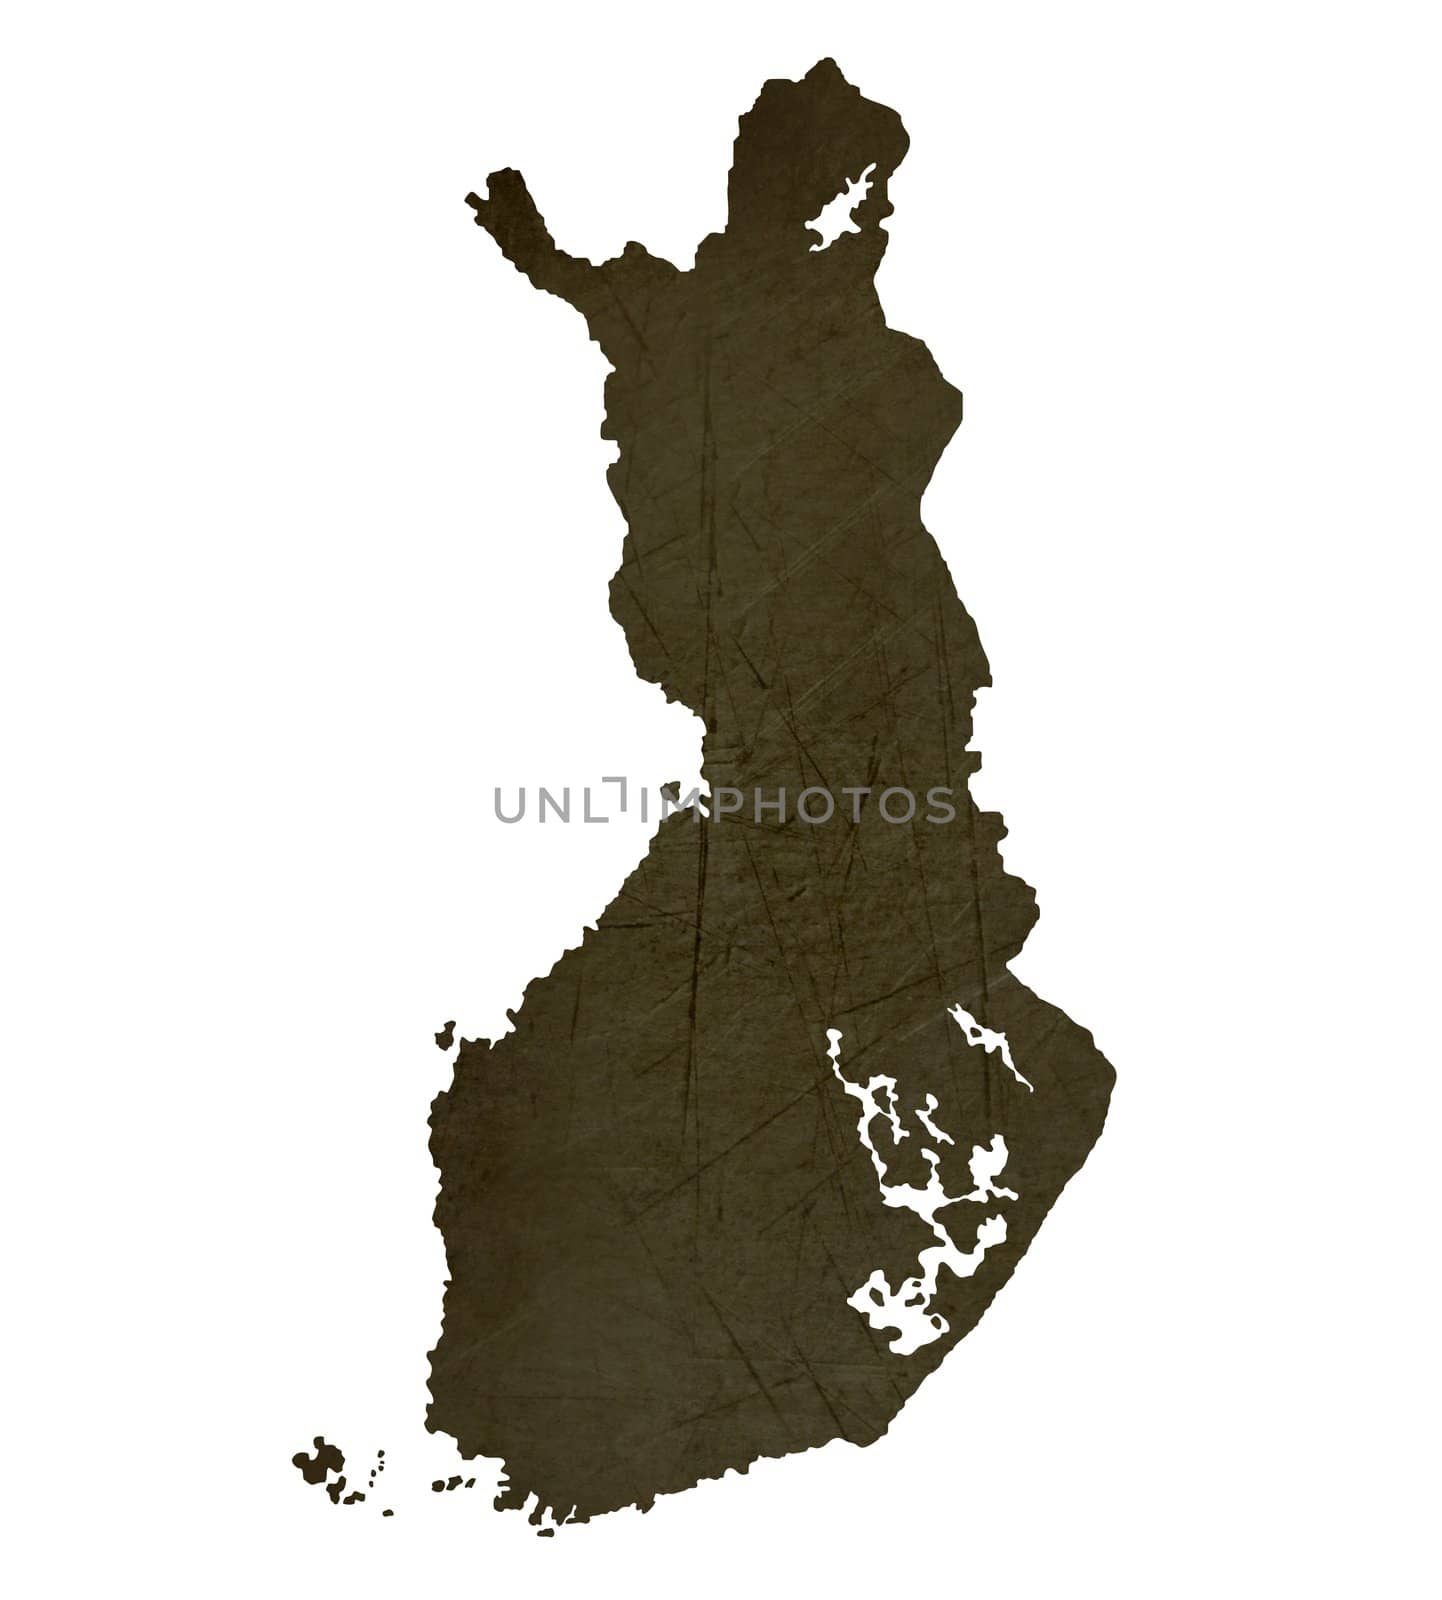 Dark silhouetted and textured map of Finland isolated on white background.